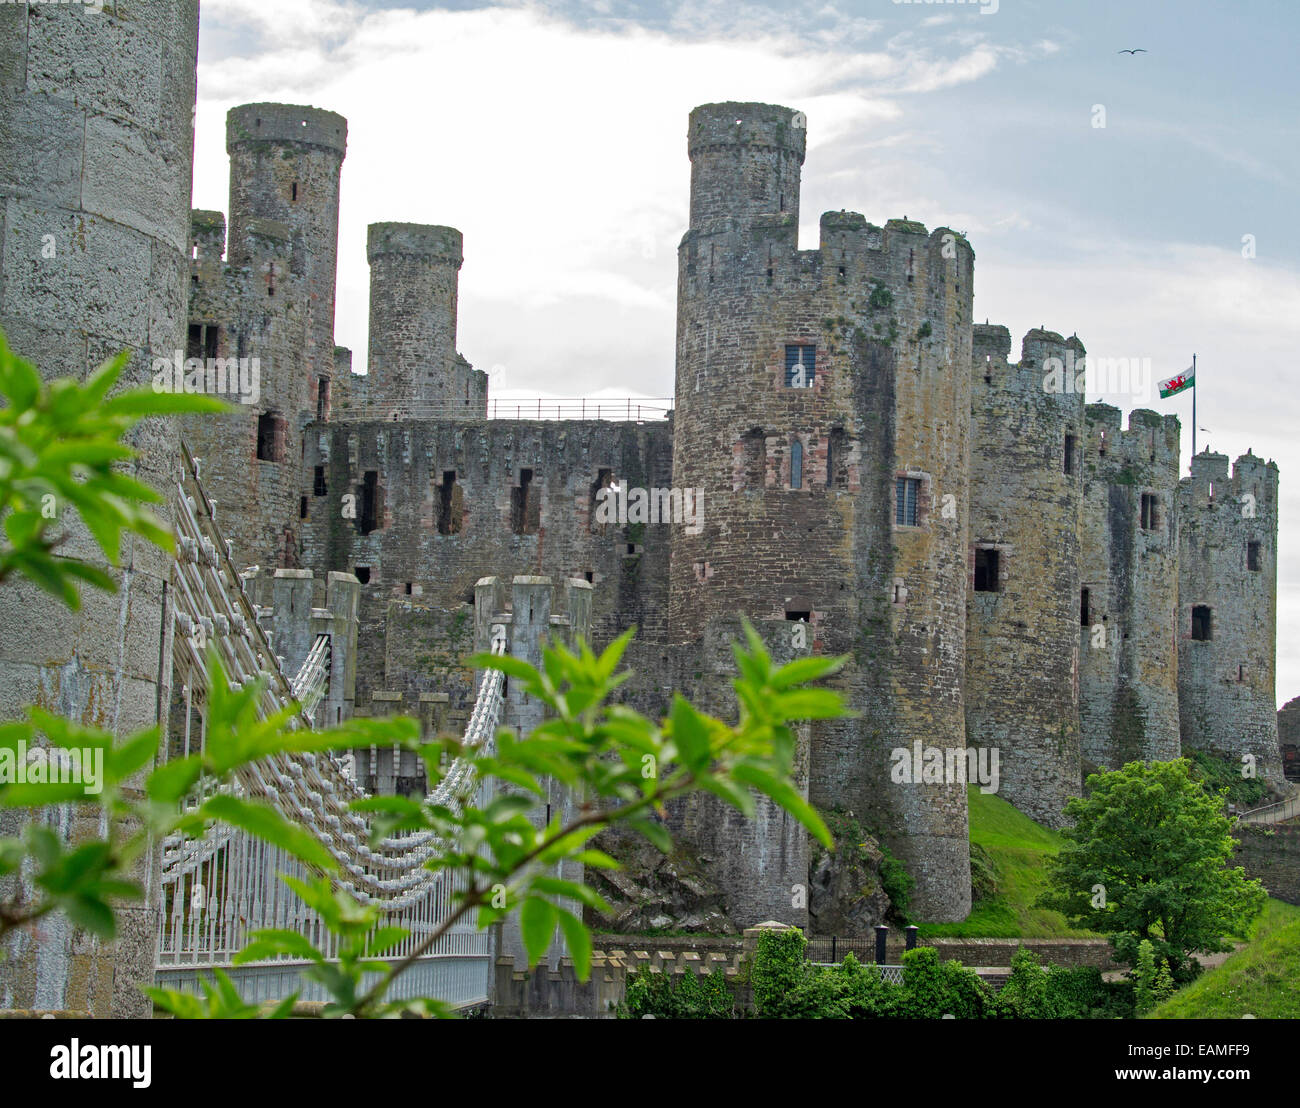 Historic 13th century Conwy castle in Wales with bridge in foreground & huge round towers spearing into sky Stock Photo